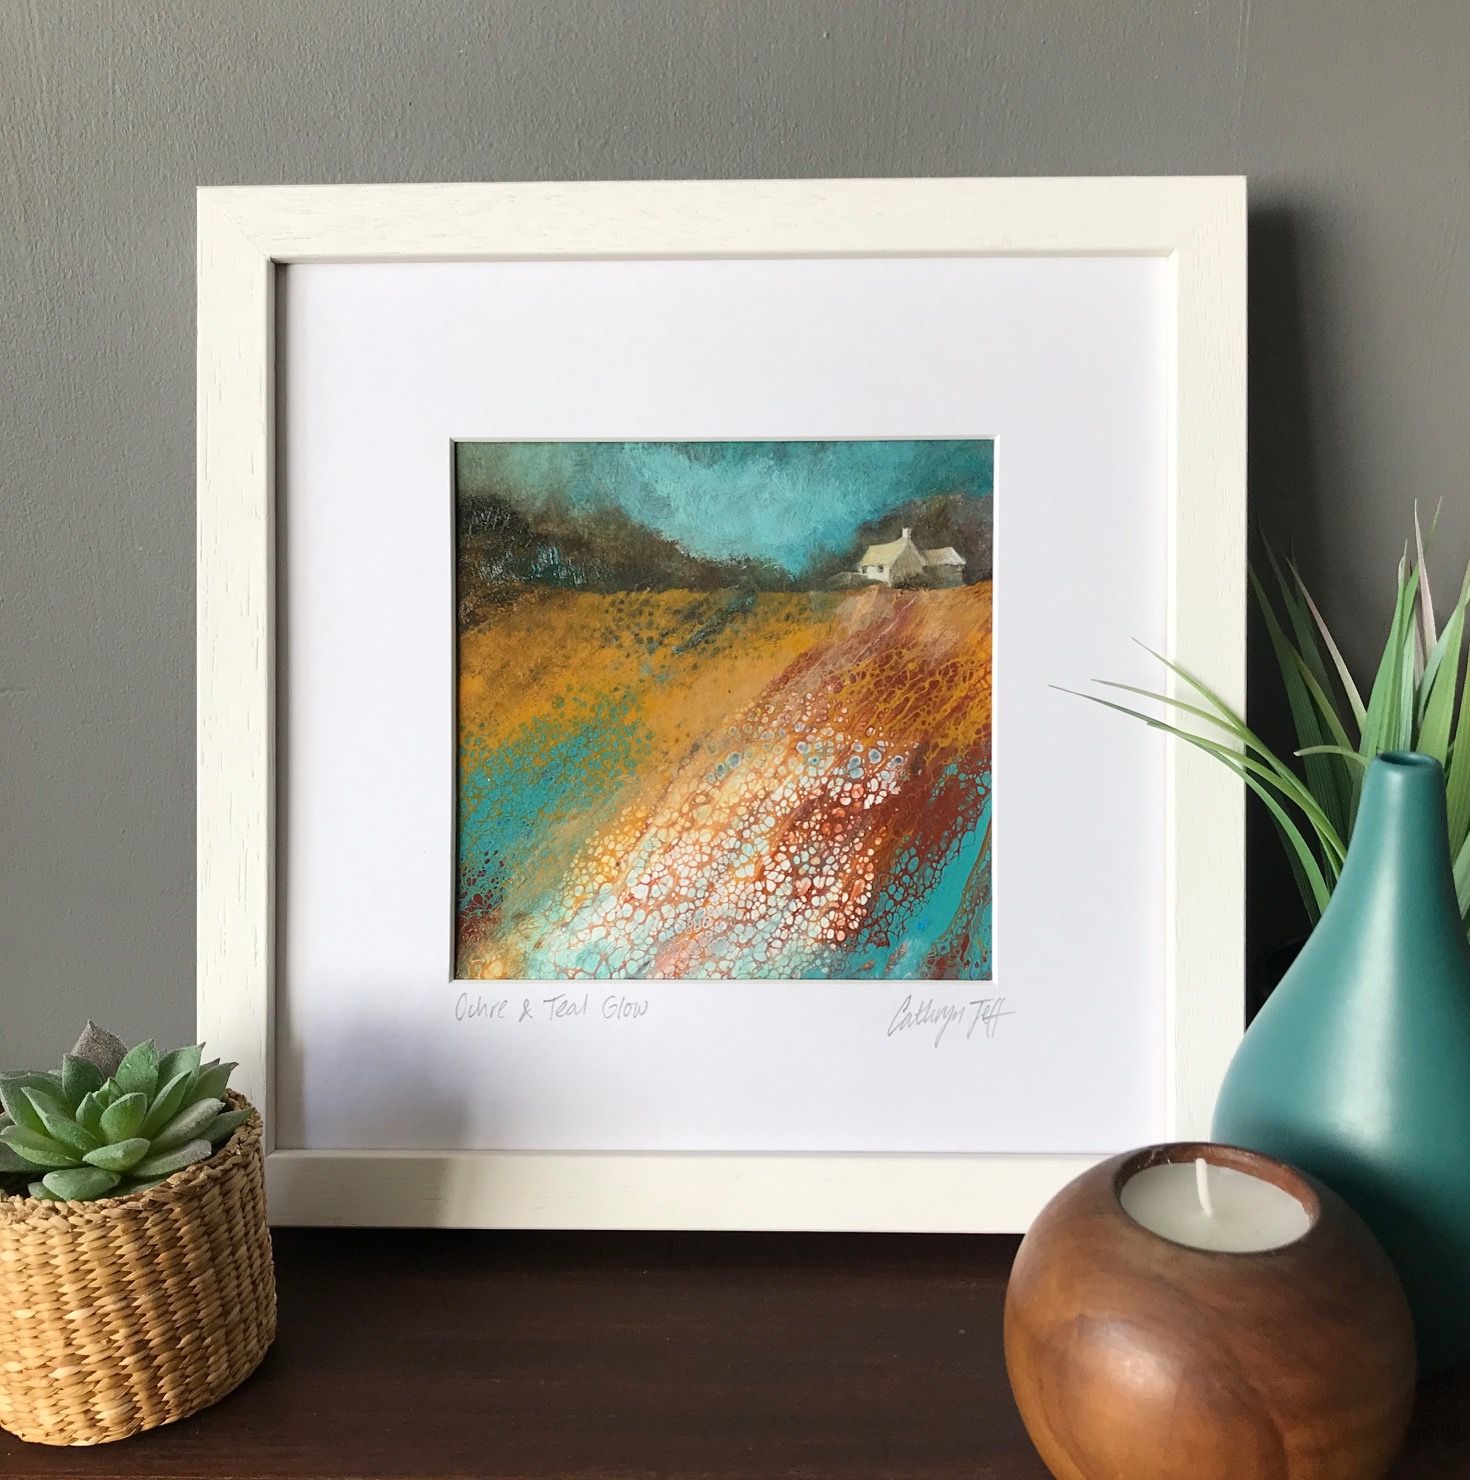 Ochre & Teal Glow by Cathryn Jeff - Secondary Image